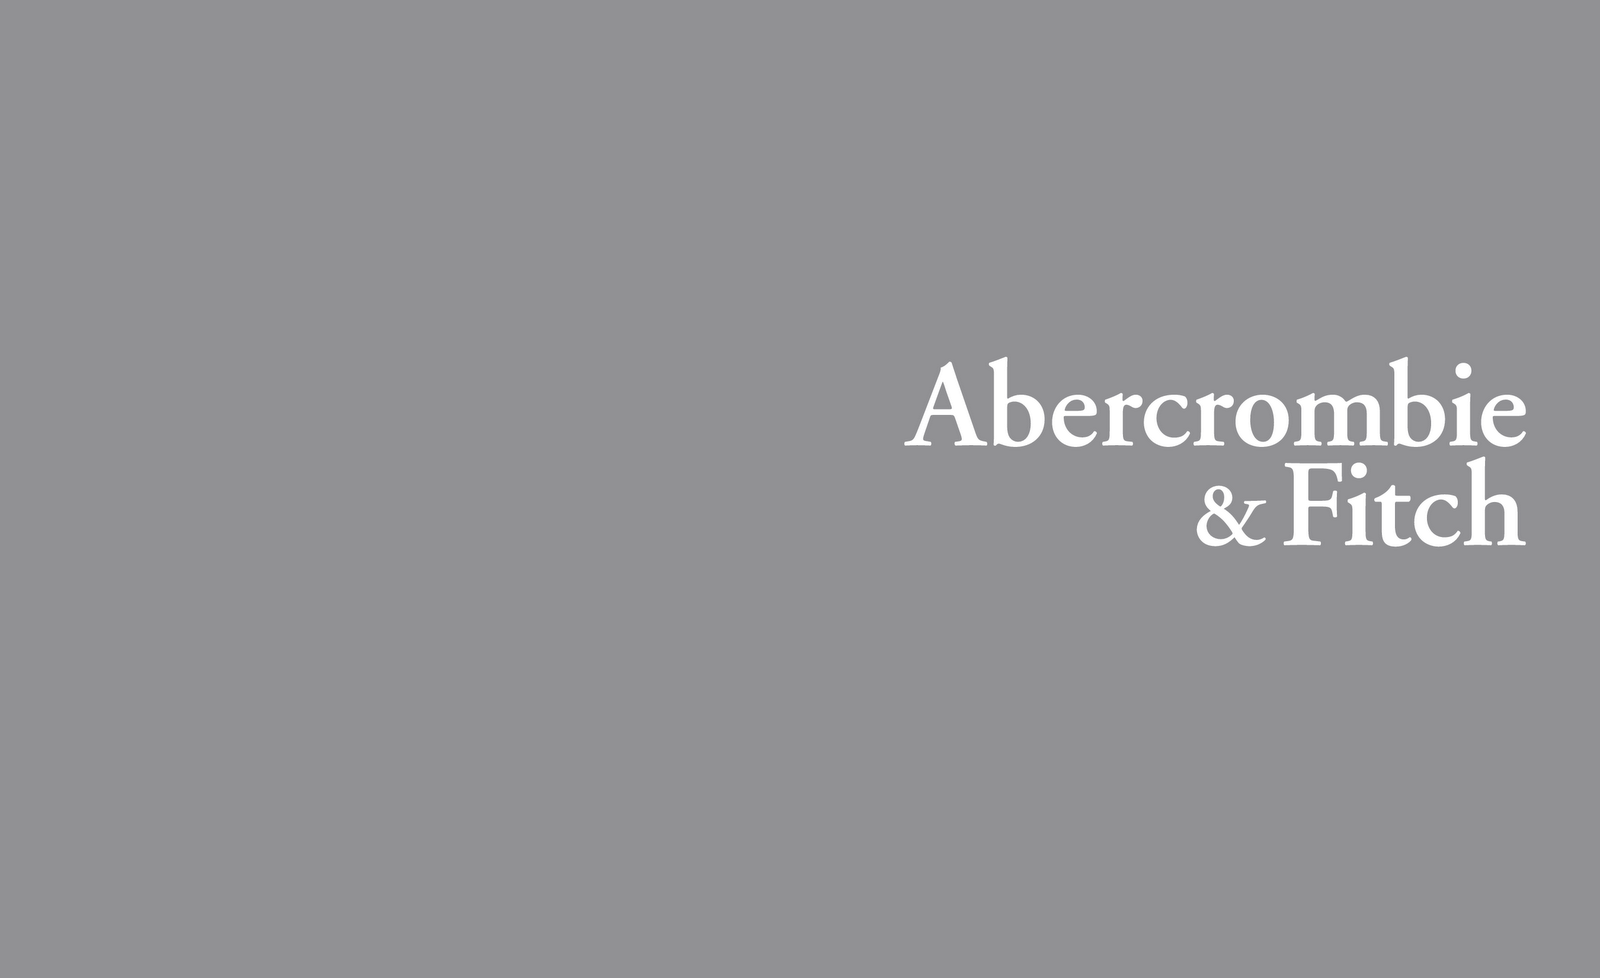 Everything About All Logos: Abercrombie & Fitch History